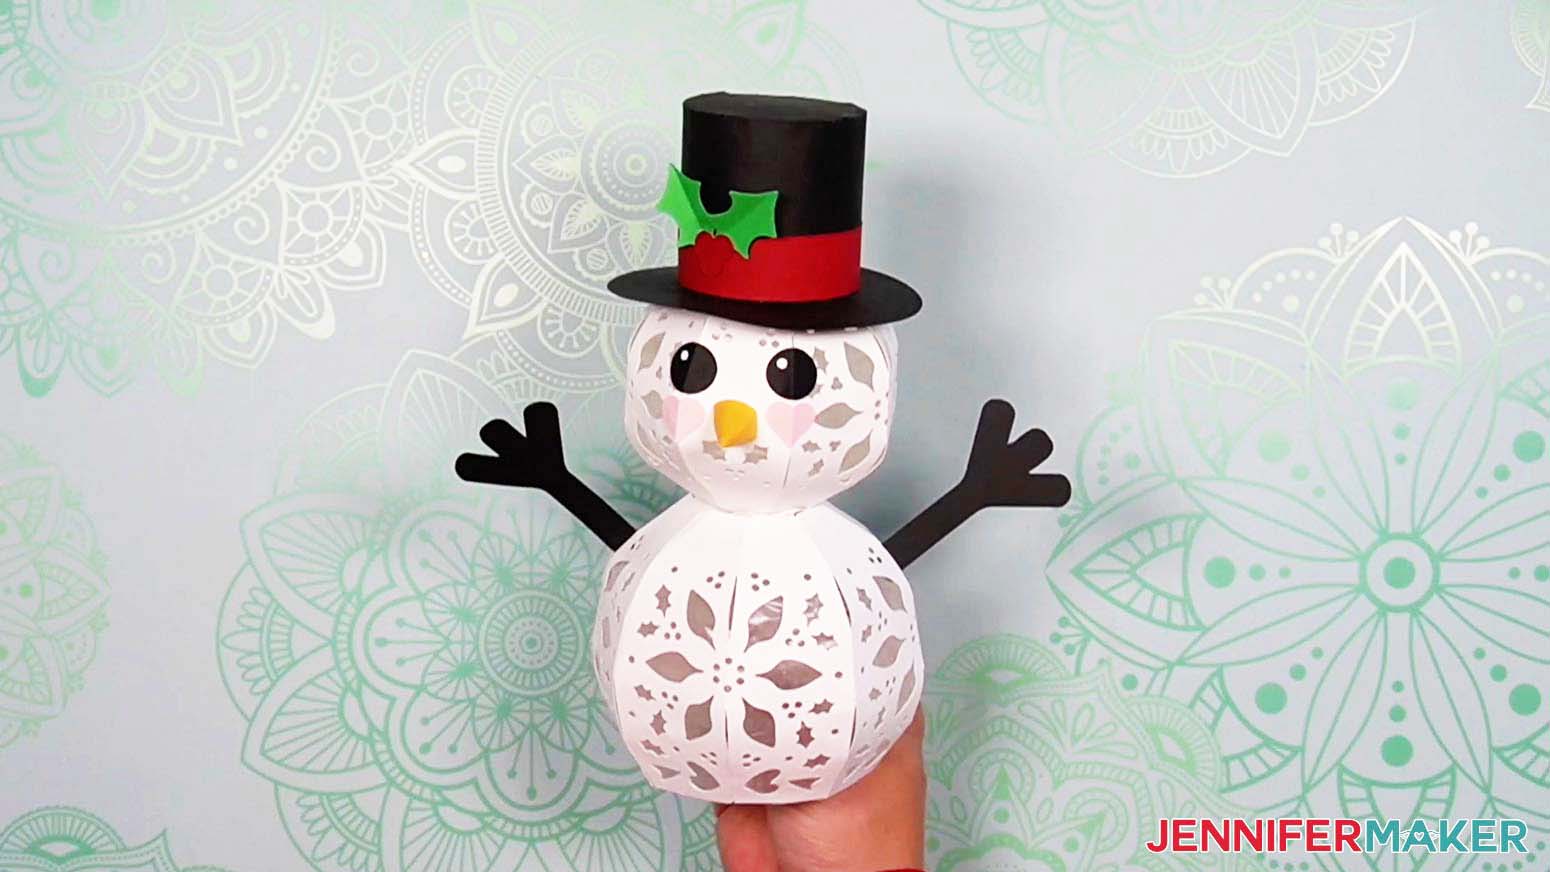 Attach the folded holly leaves and berry piece to the light up snowman's hat on top of the ribbon piece